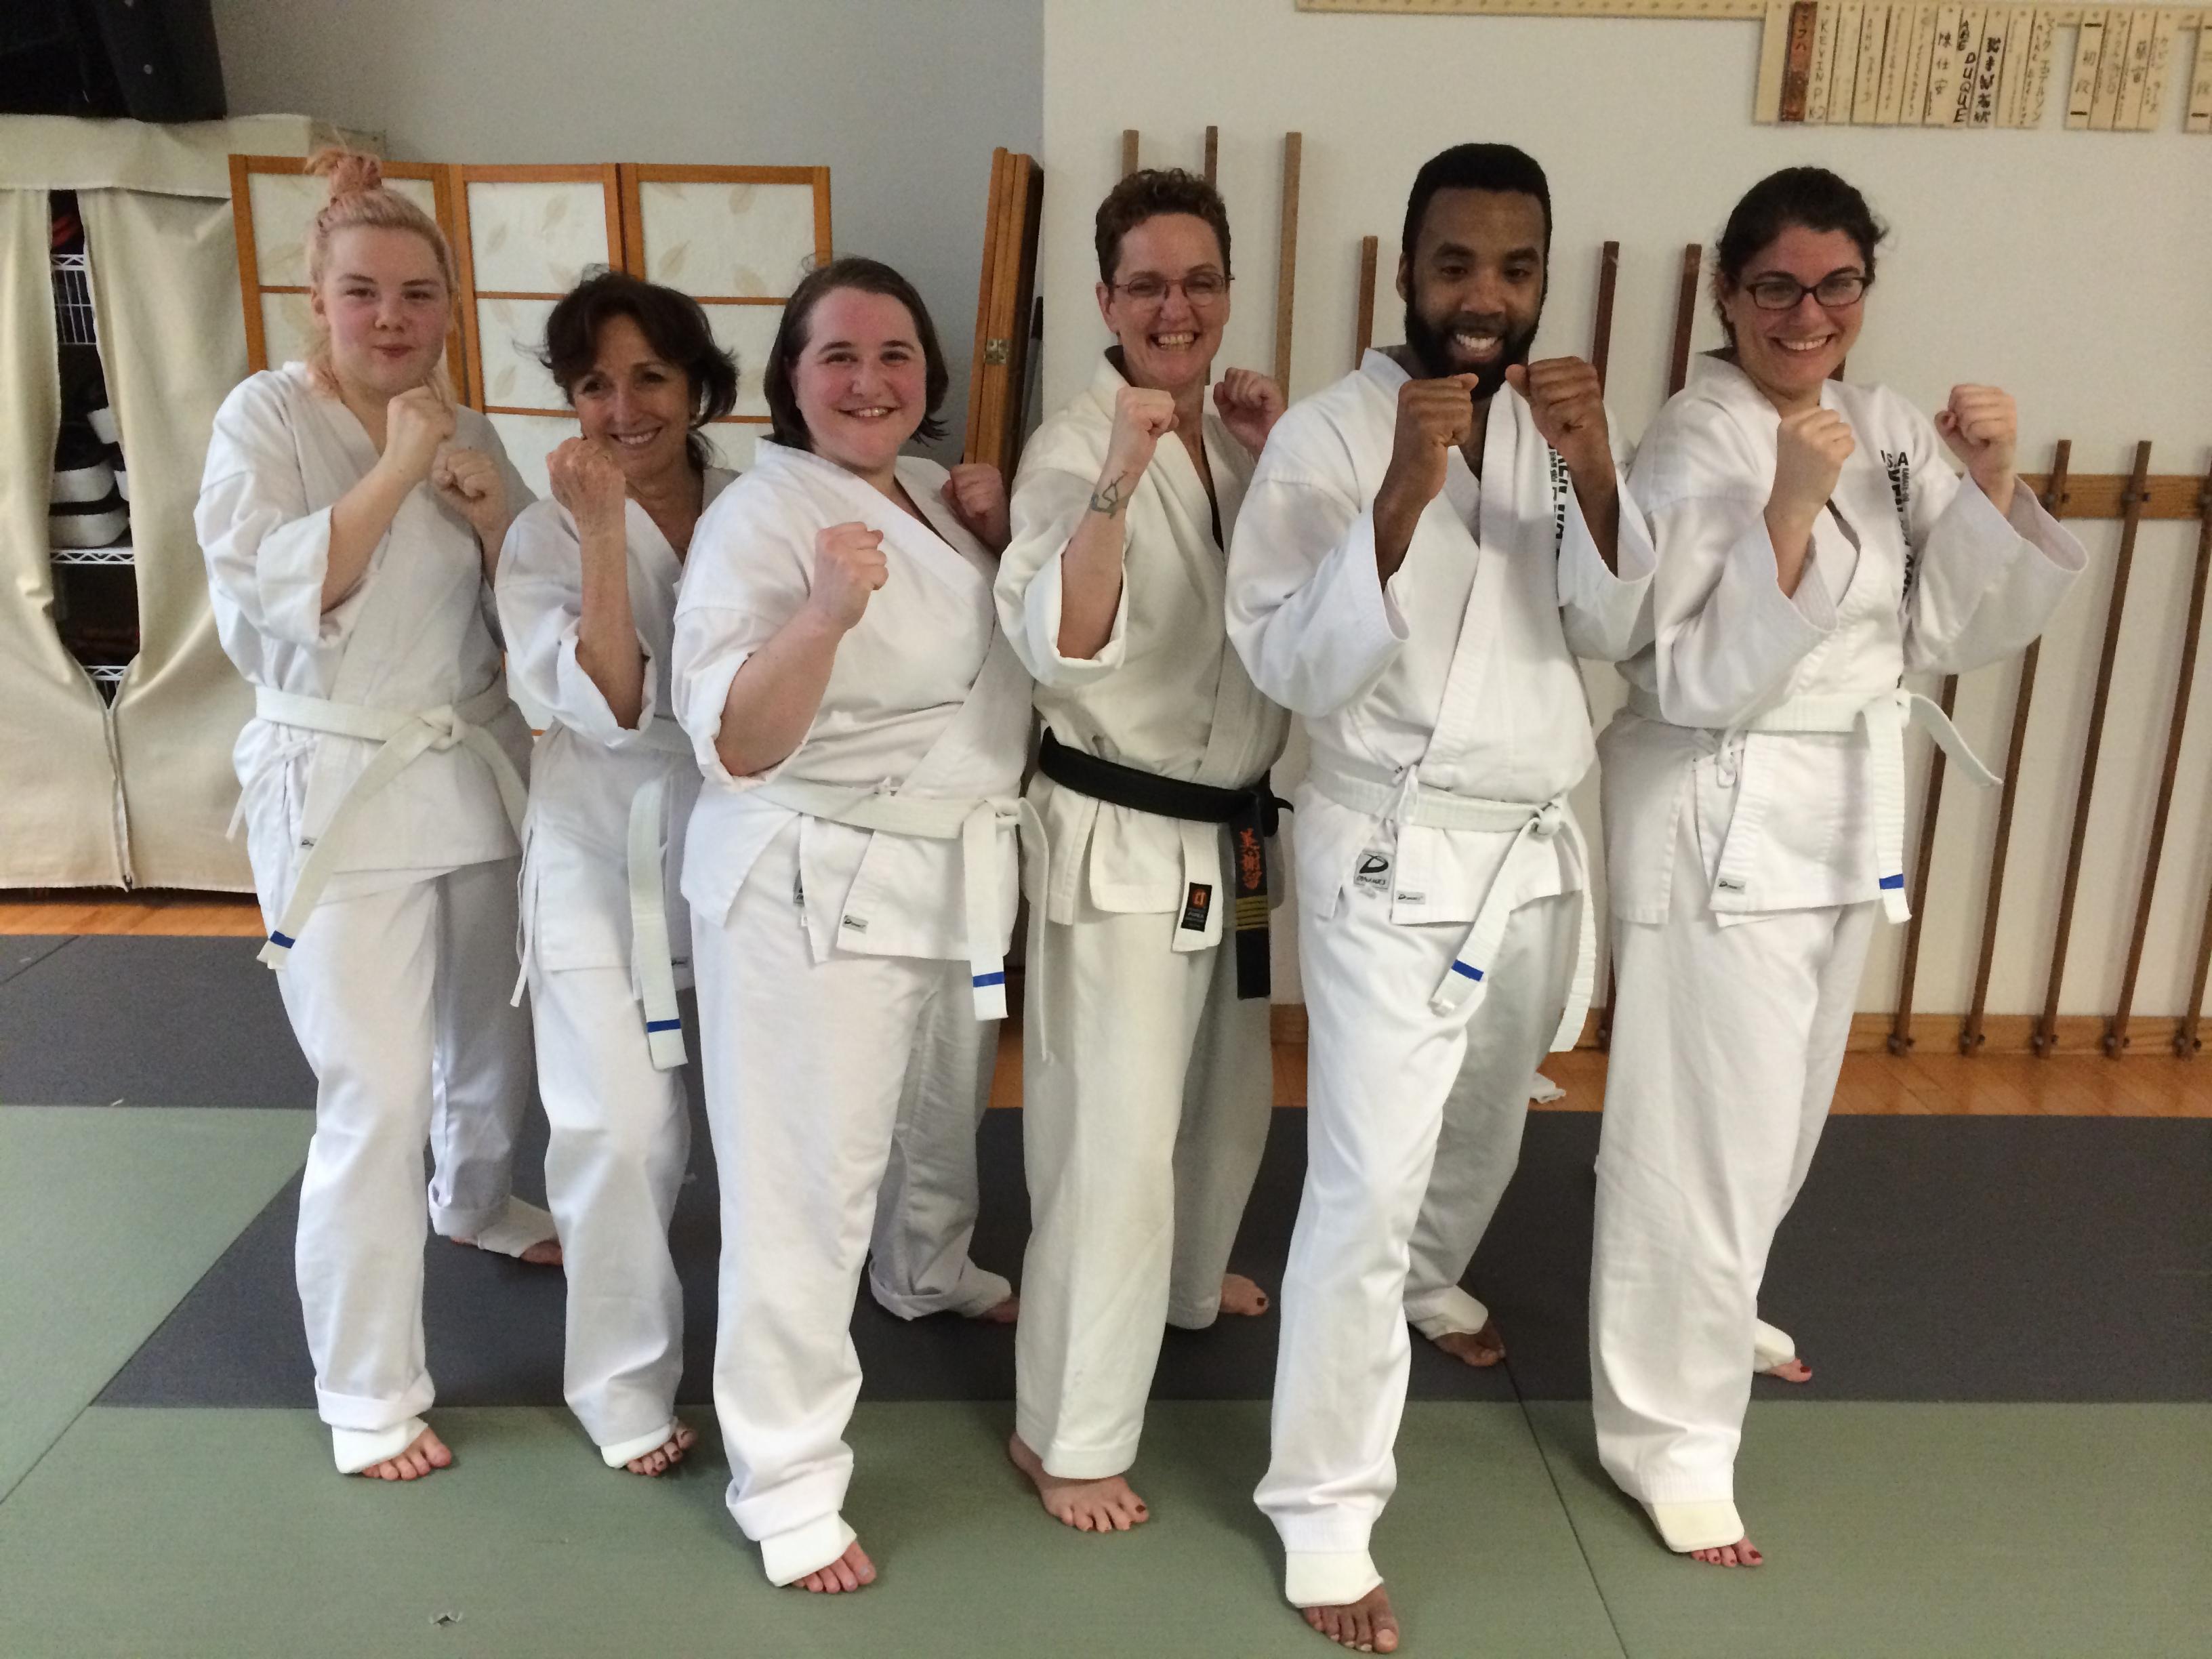 Blue Stripes to acknowledge their kick butt progress! On the road to blue belts! Osu!!